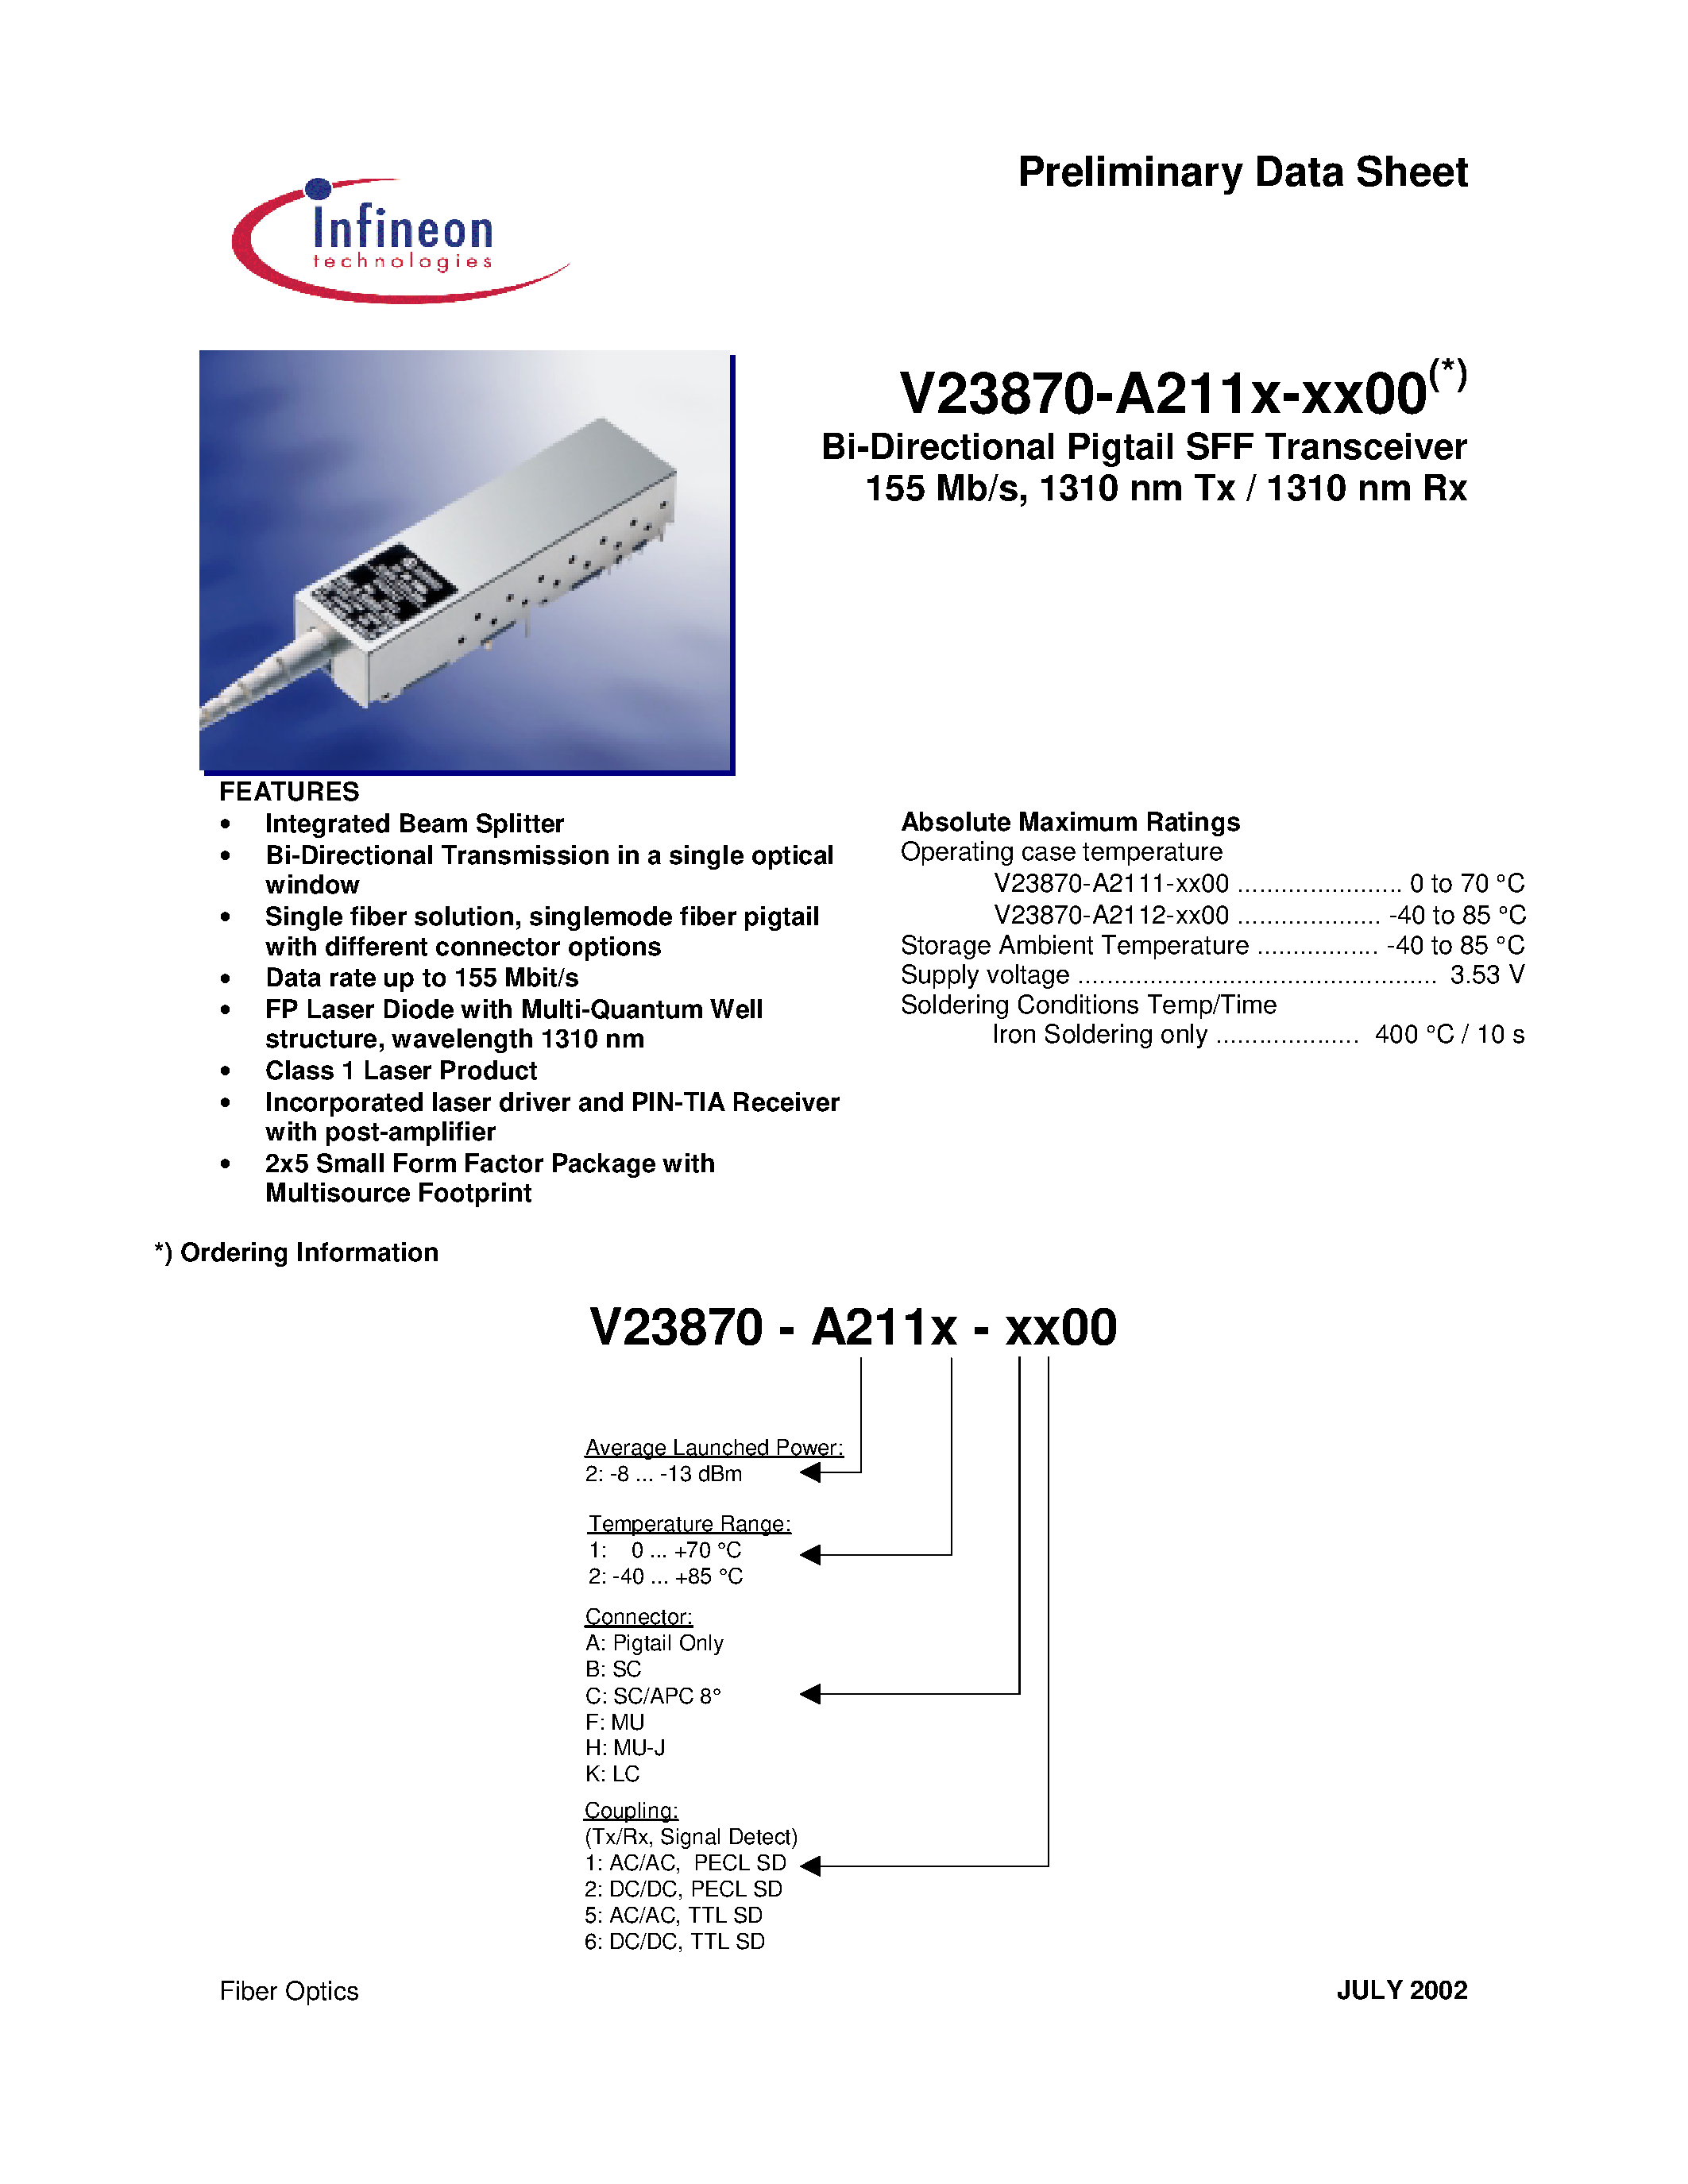 Datasheet V23870-A2111-F600 - Bi-Directional Pigtail SFF Transceiver 155 Mb/s/ 1310 nm Tx / 1310 nm Rx page 1